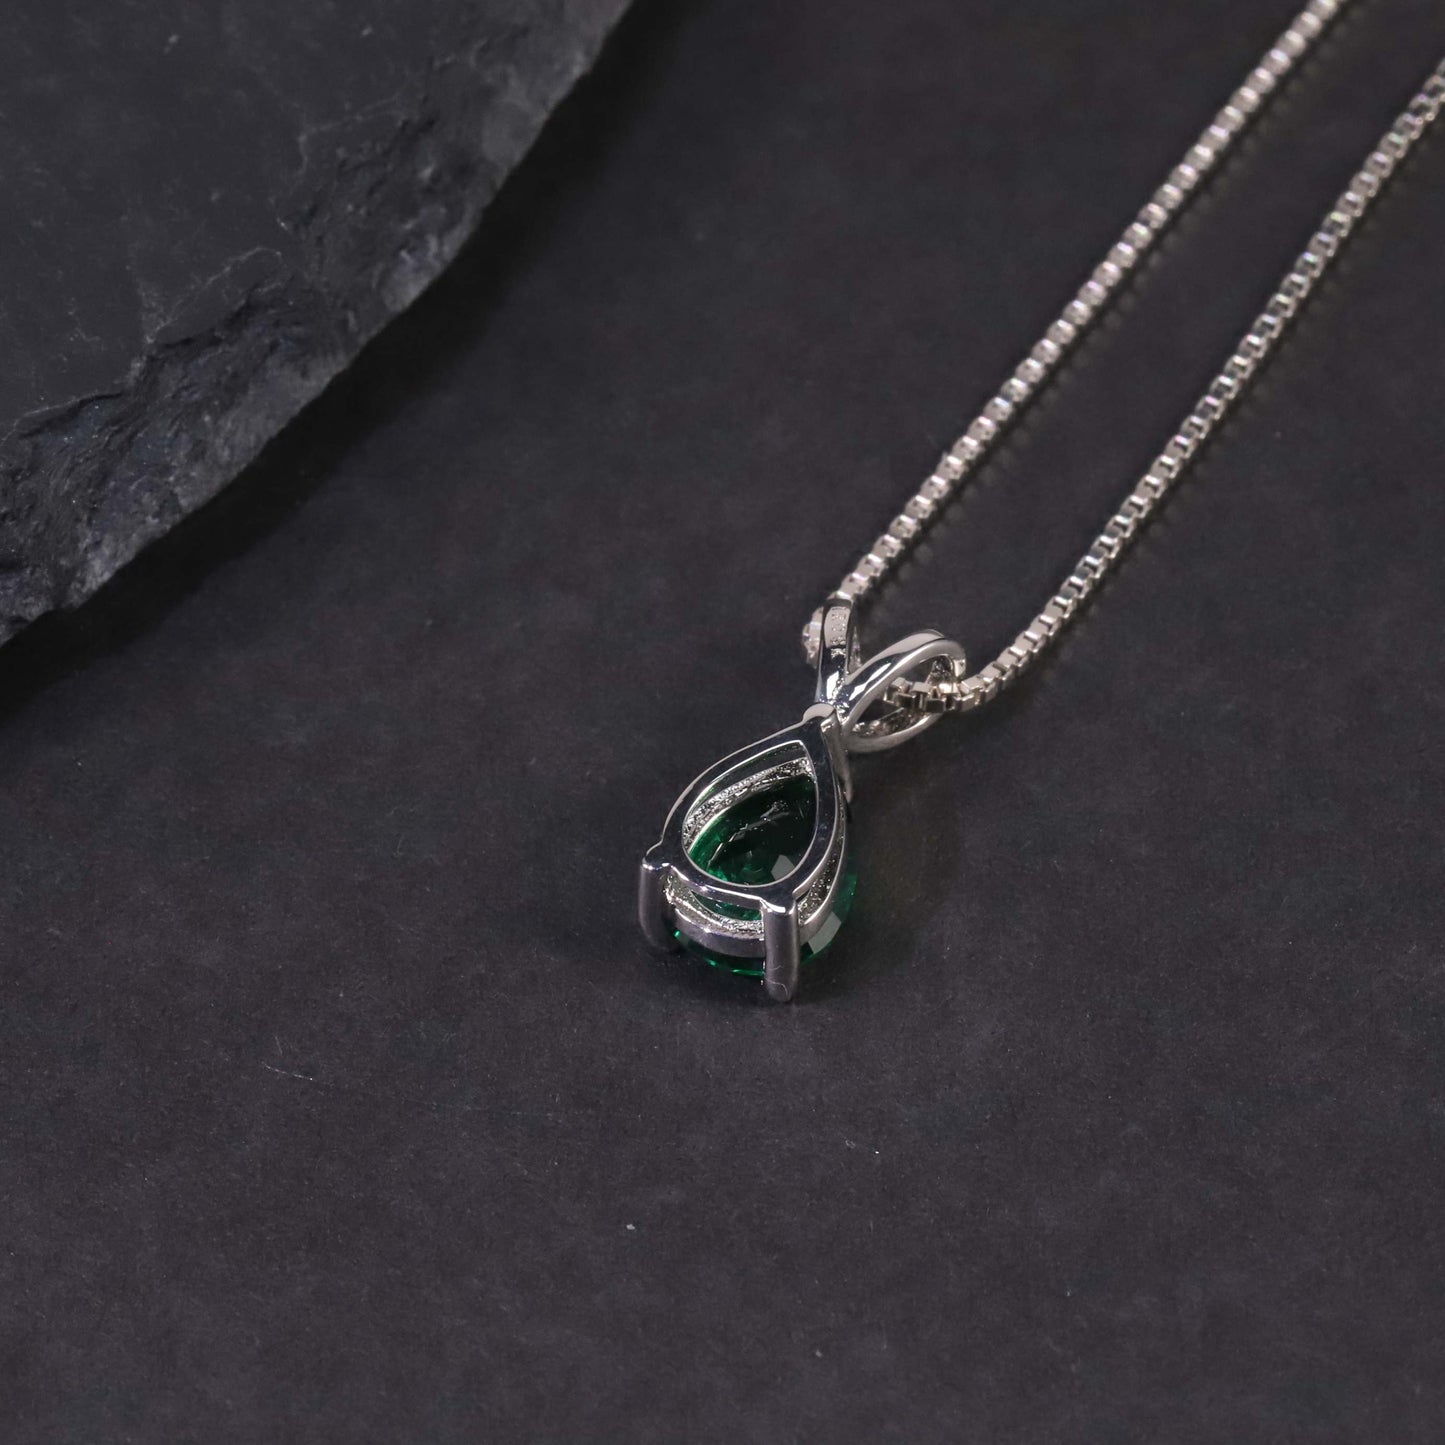 Irosk Pear Cut Necklace in Sterling Silver -  Emerald